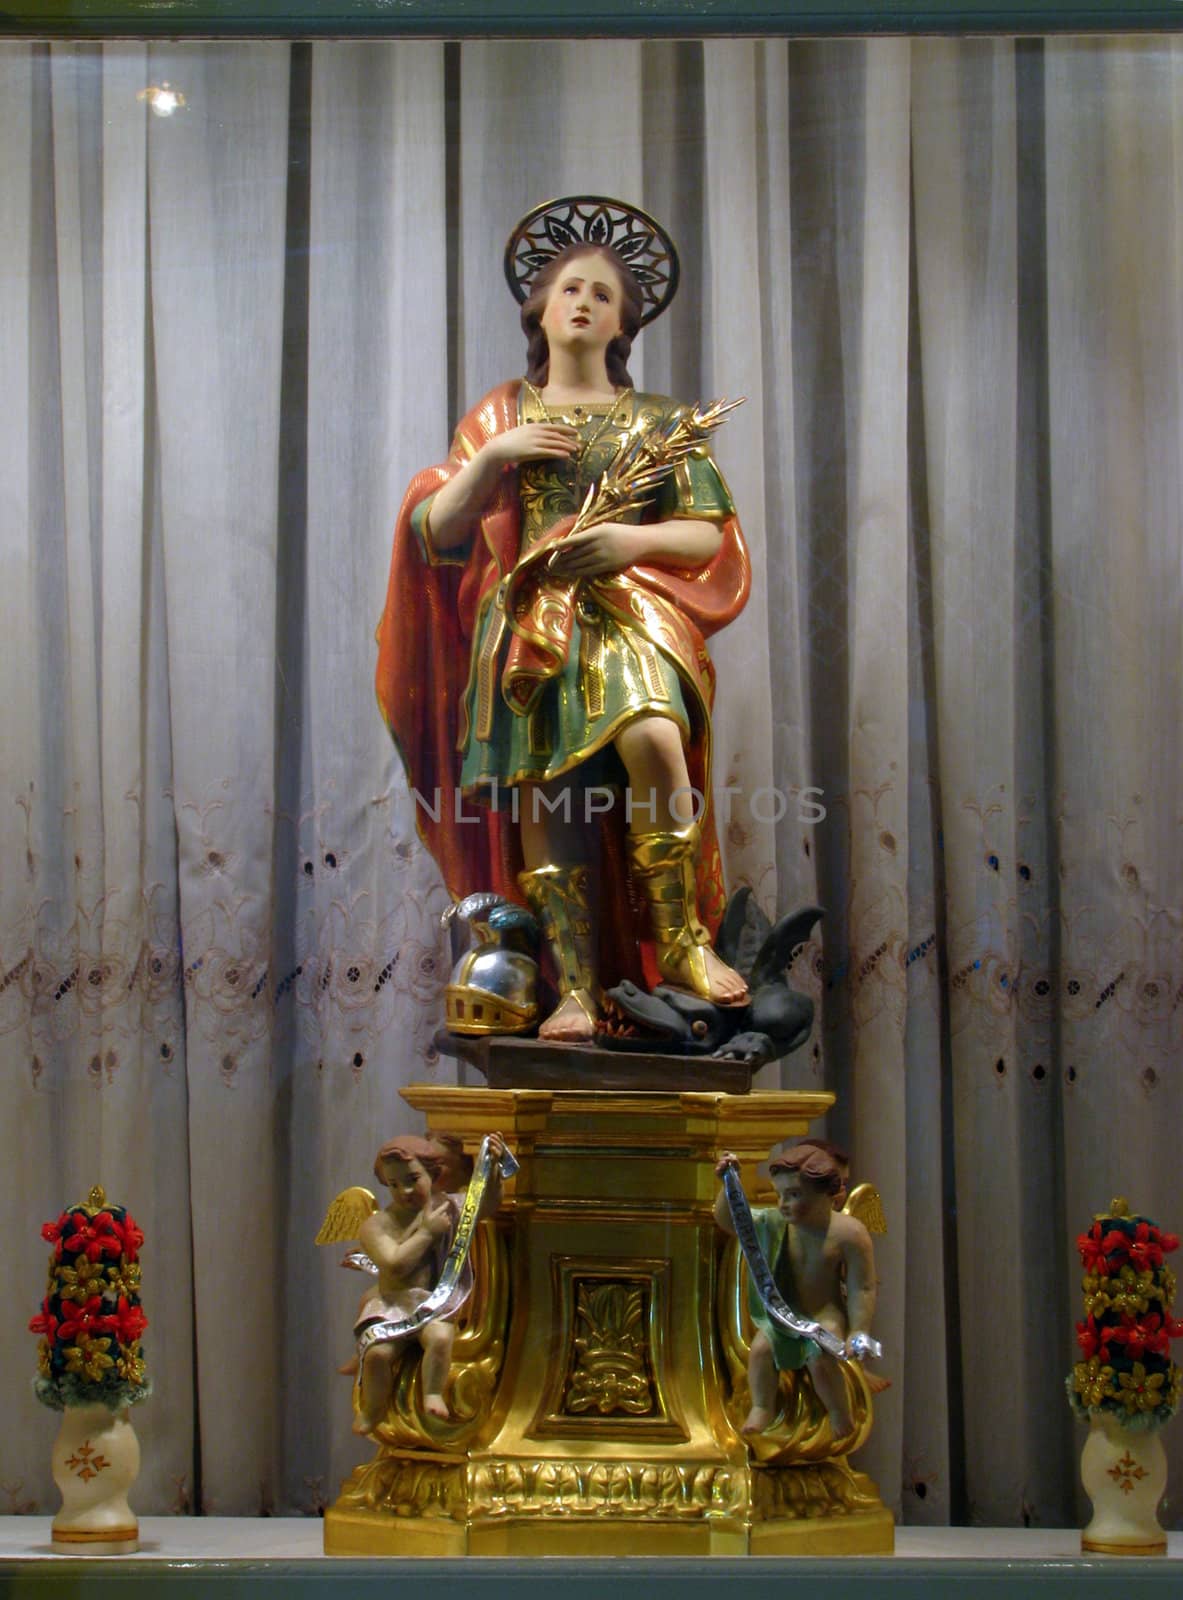 A replica of the titular statue of Saint George of Qormi in Malta on display for the occassion of the feast of the saint.